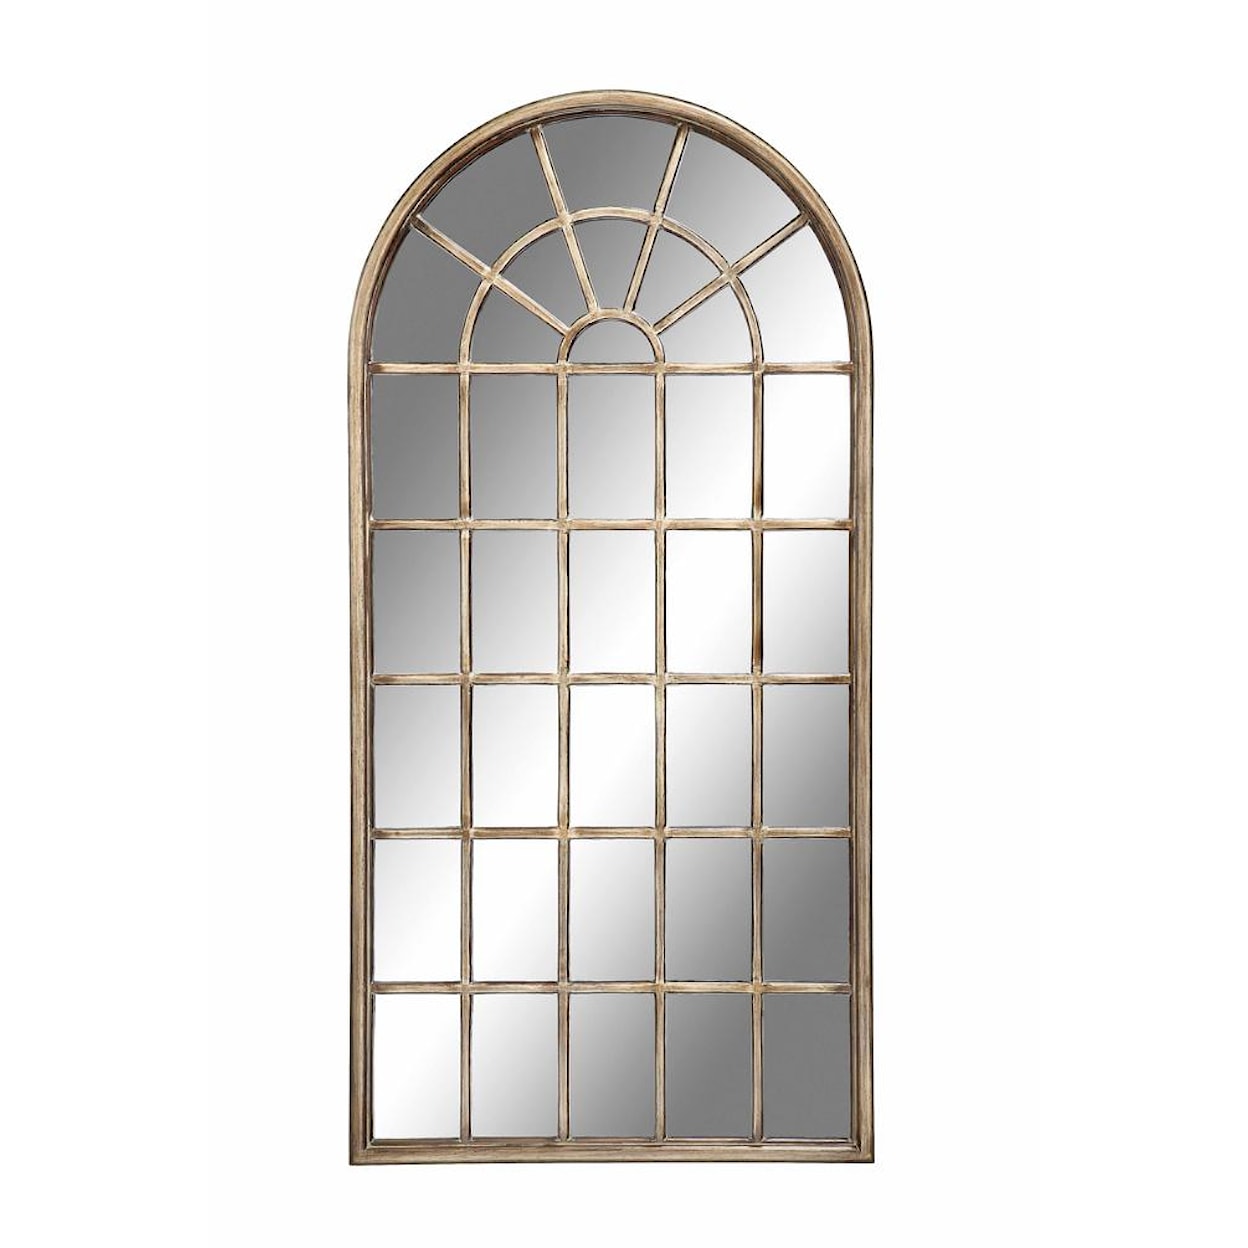 Stein World Mirrors Cathedral Wall Mirror